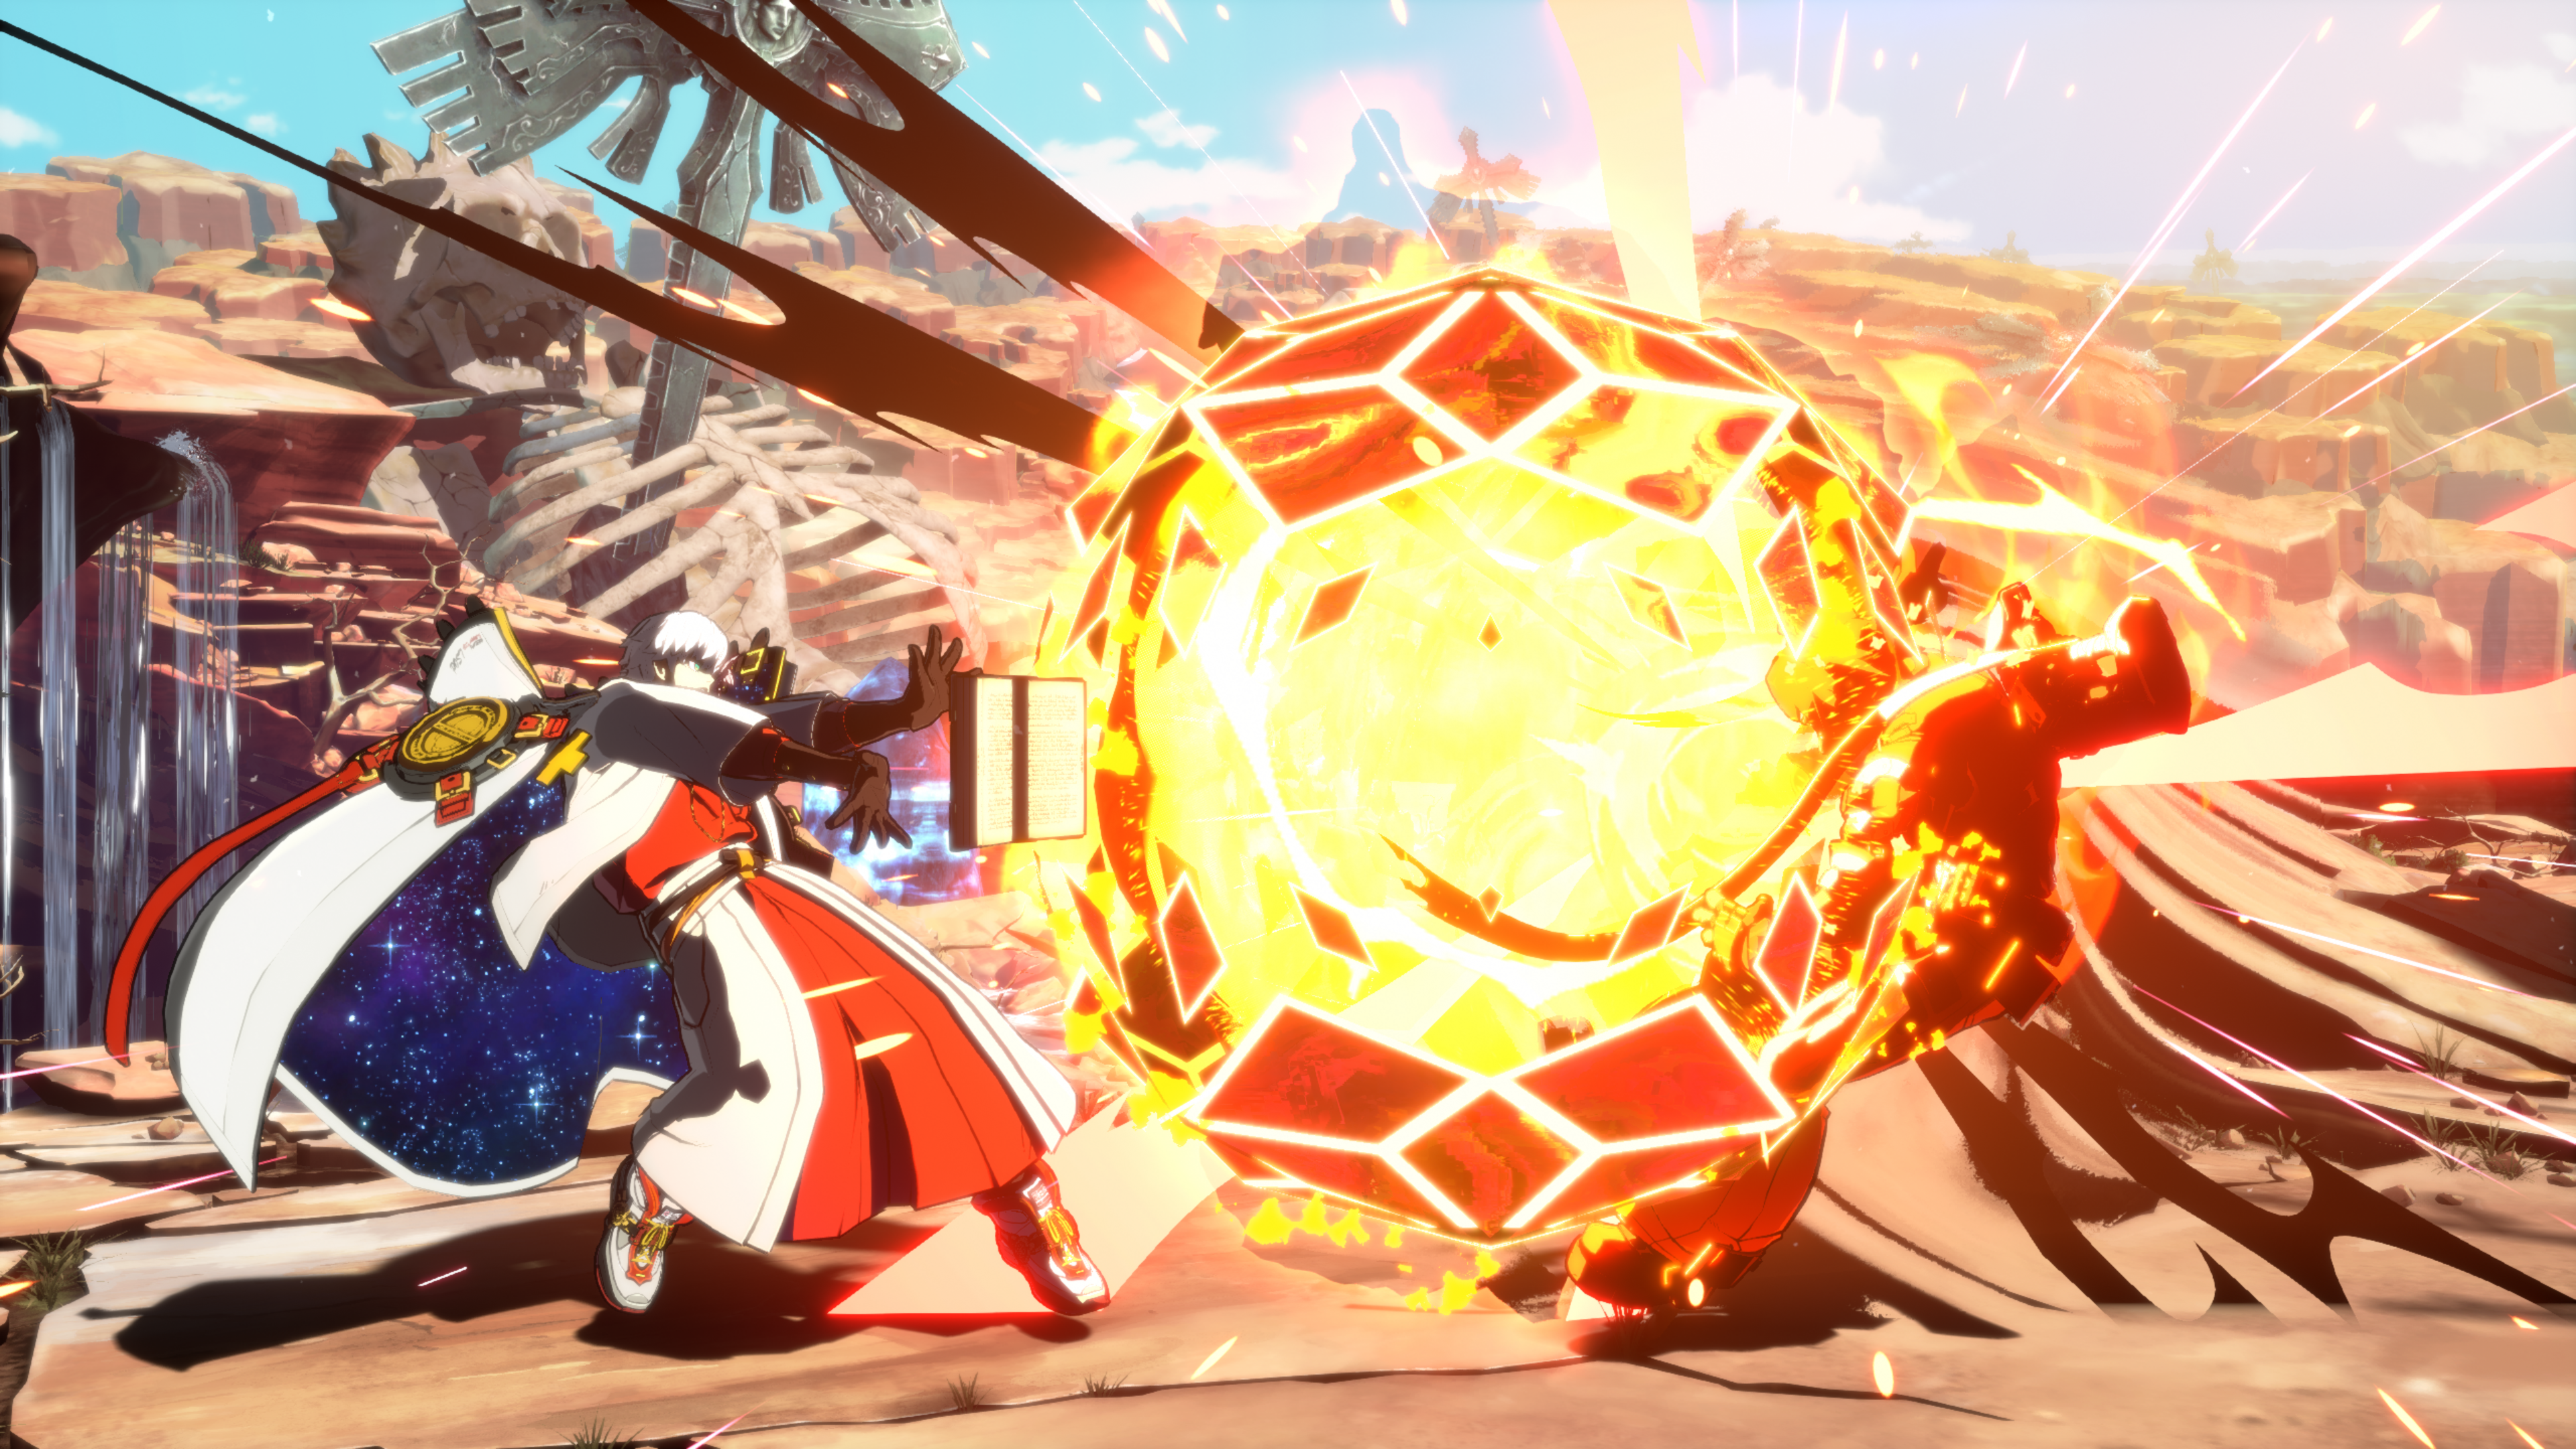 Guilty Gear Strive Story Trailer Released - The Tech Game